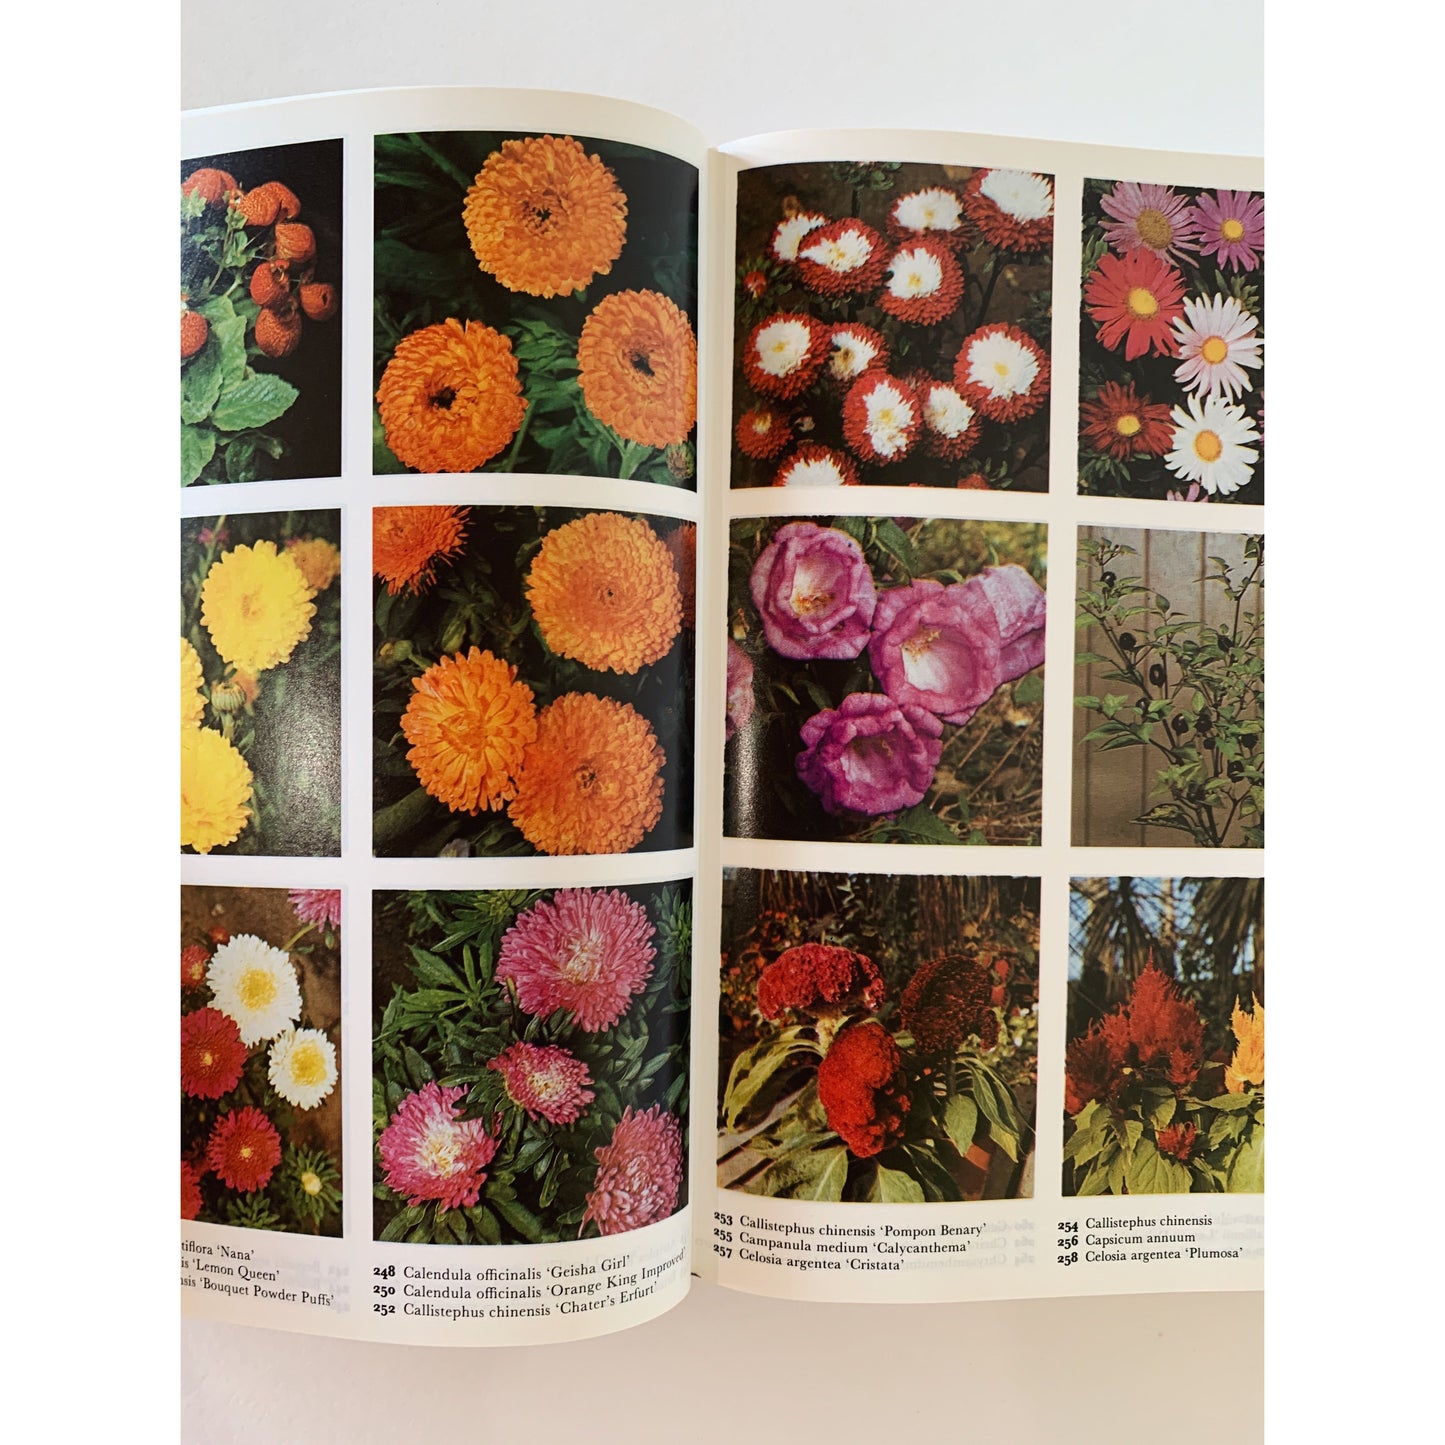 The Colour Dictionary of Garden Plants - The Royal Horticultural Society, 1991